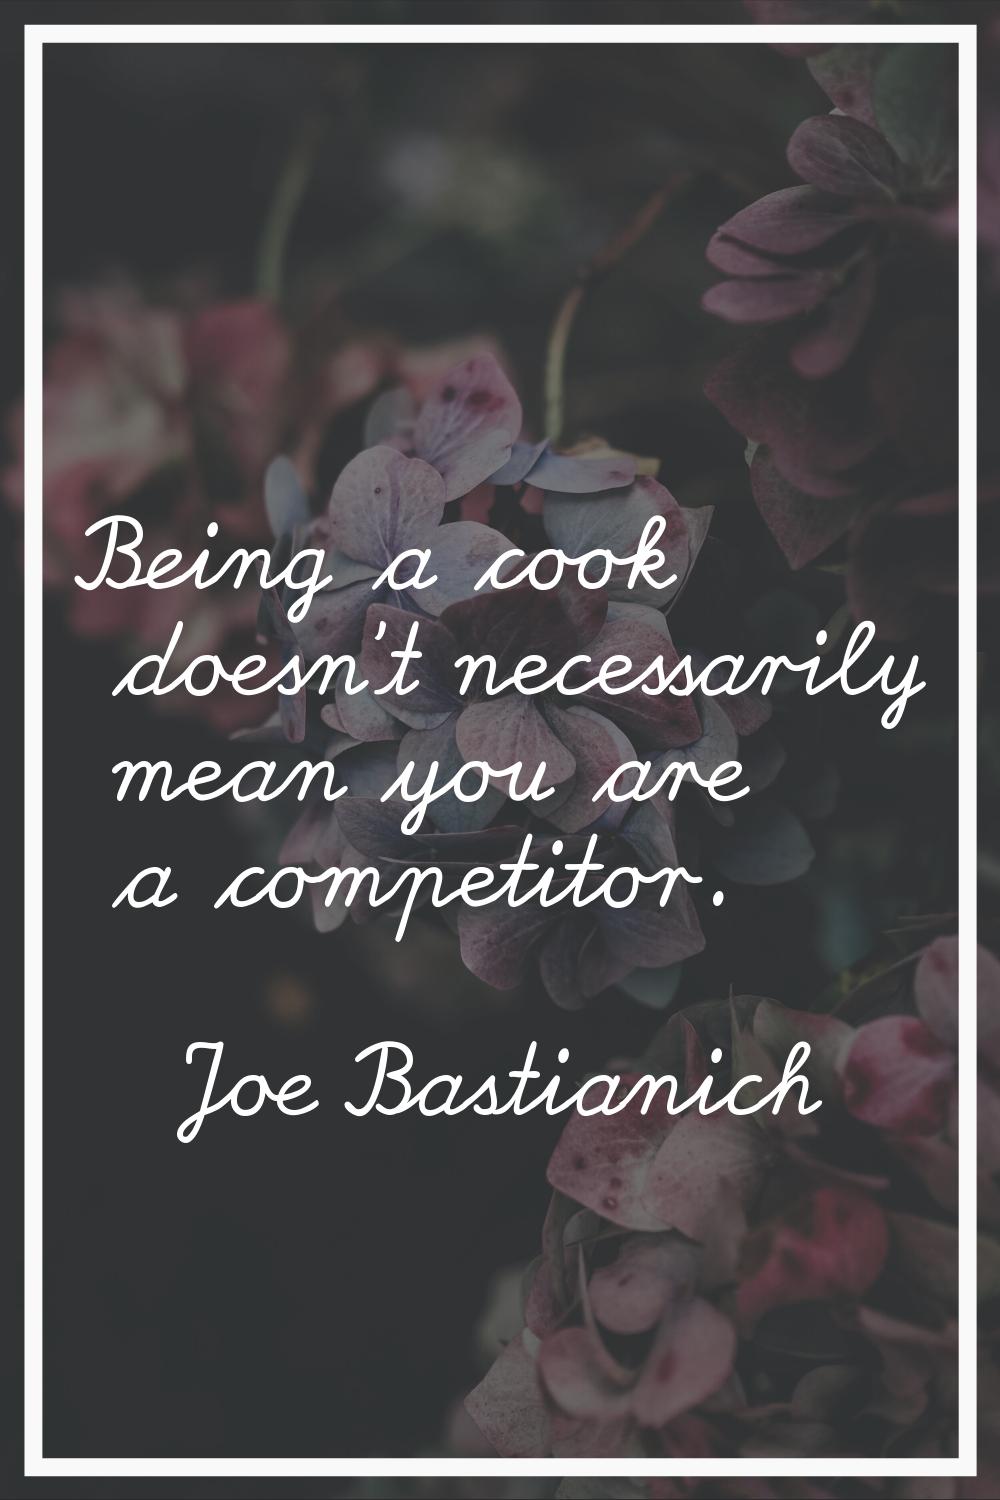 Being a cook doesn't necessarily mean you are a competitor.